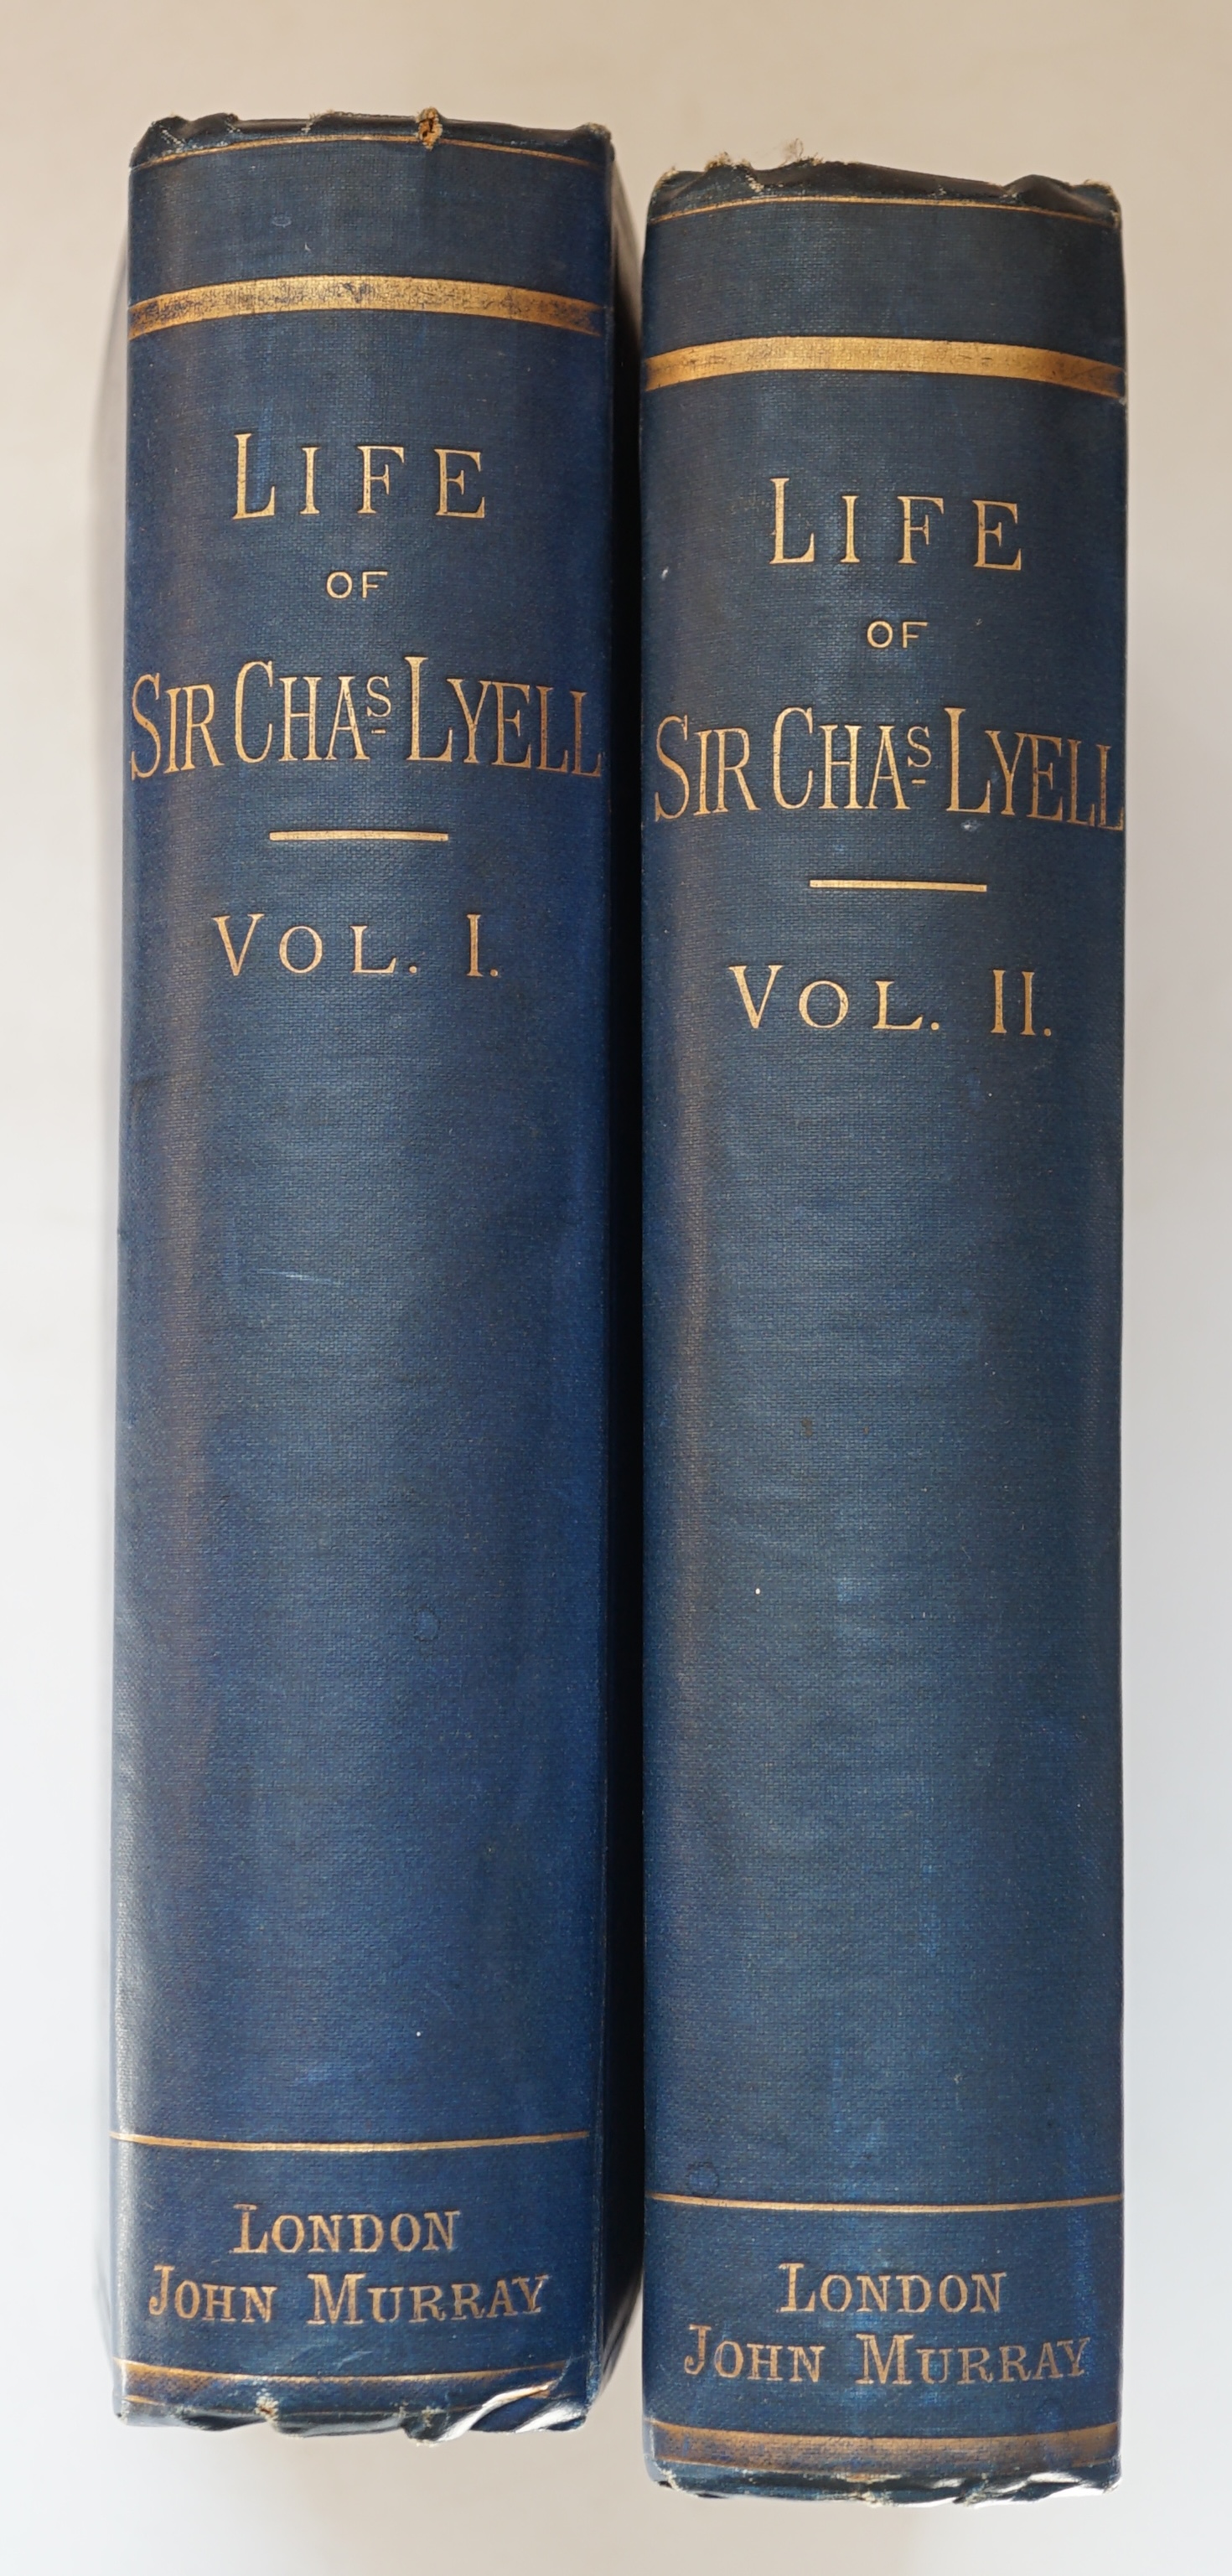 Lyell, Mrs (editor) - Life and Journals of Sir Charles Lyell, Bart., 2 vols, 8vo, blue cloth gilt, with portrait frontispieces, John Murray, London, 1881